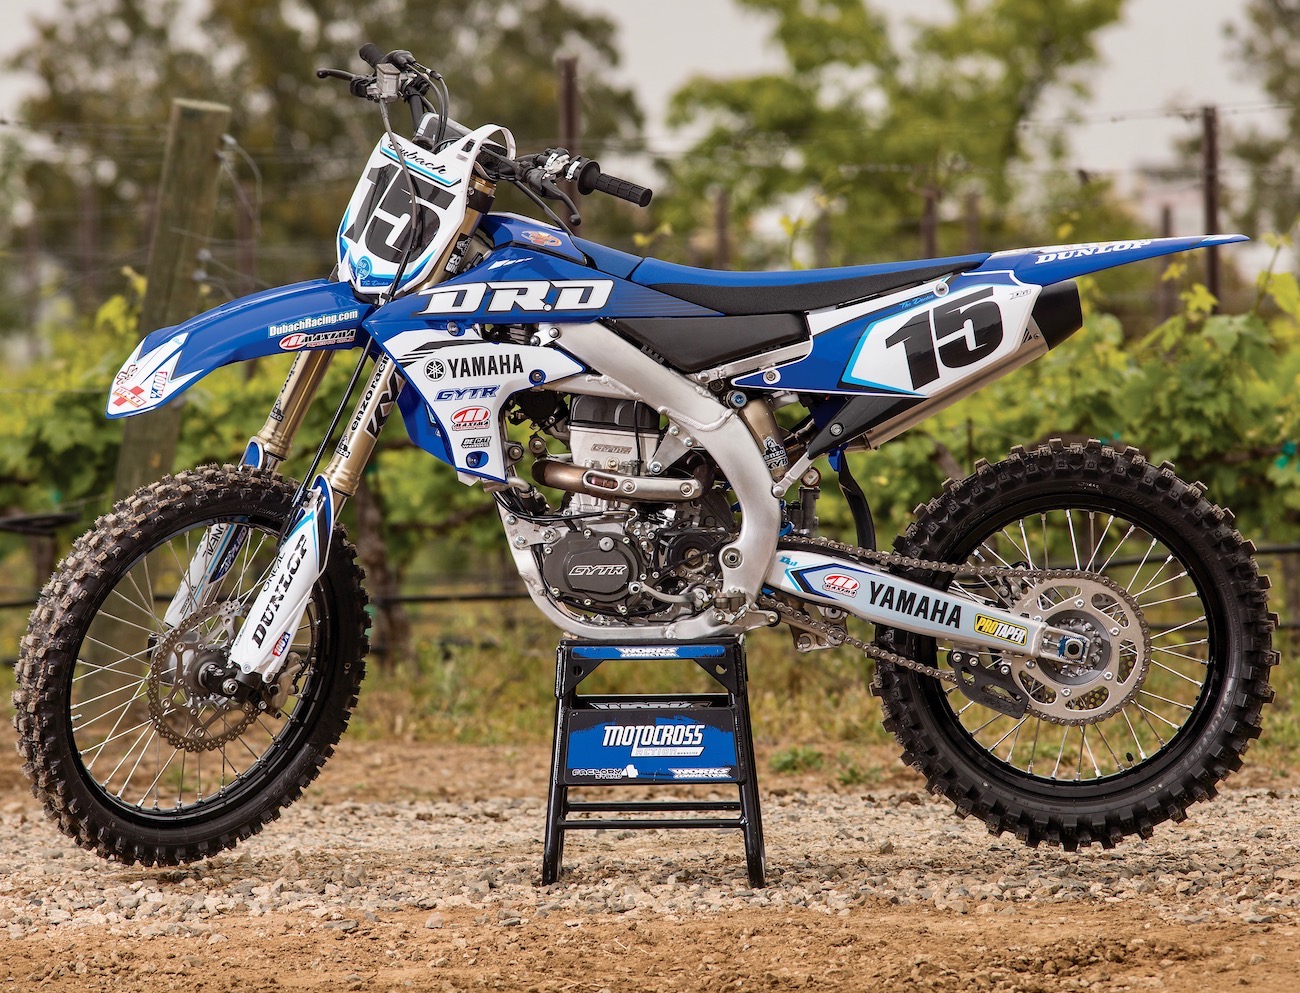 WE RIDE DOUG DUBACH'S GYTR/DR.D YZ450F  TELL YOU WHAT'S INSIDE - Motocross  Action Magazine